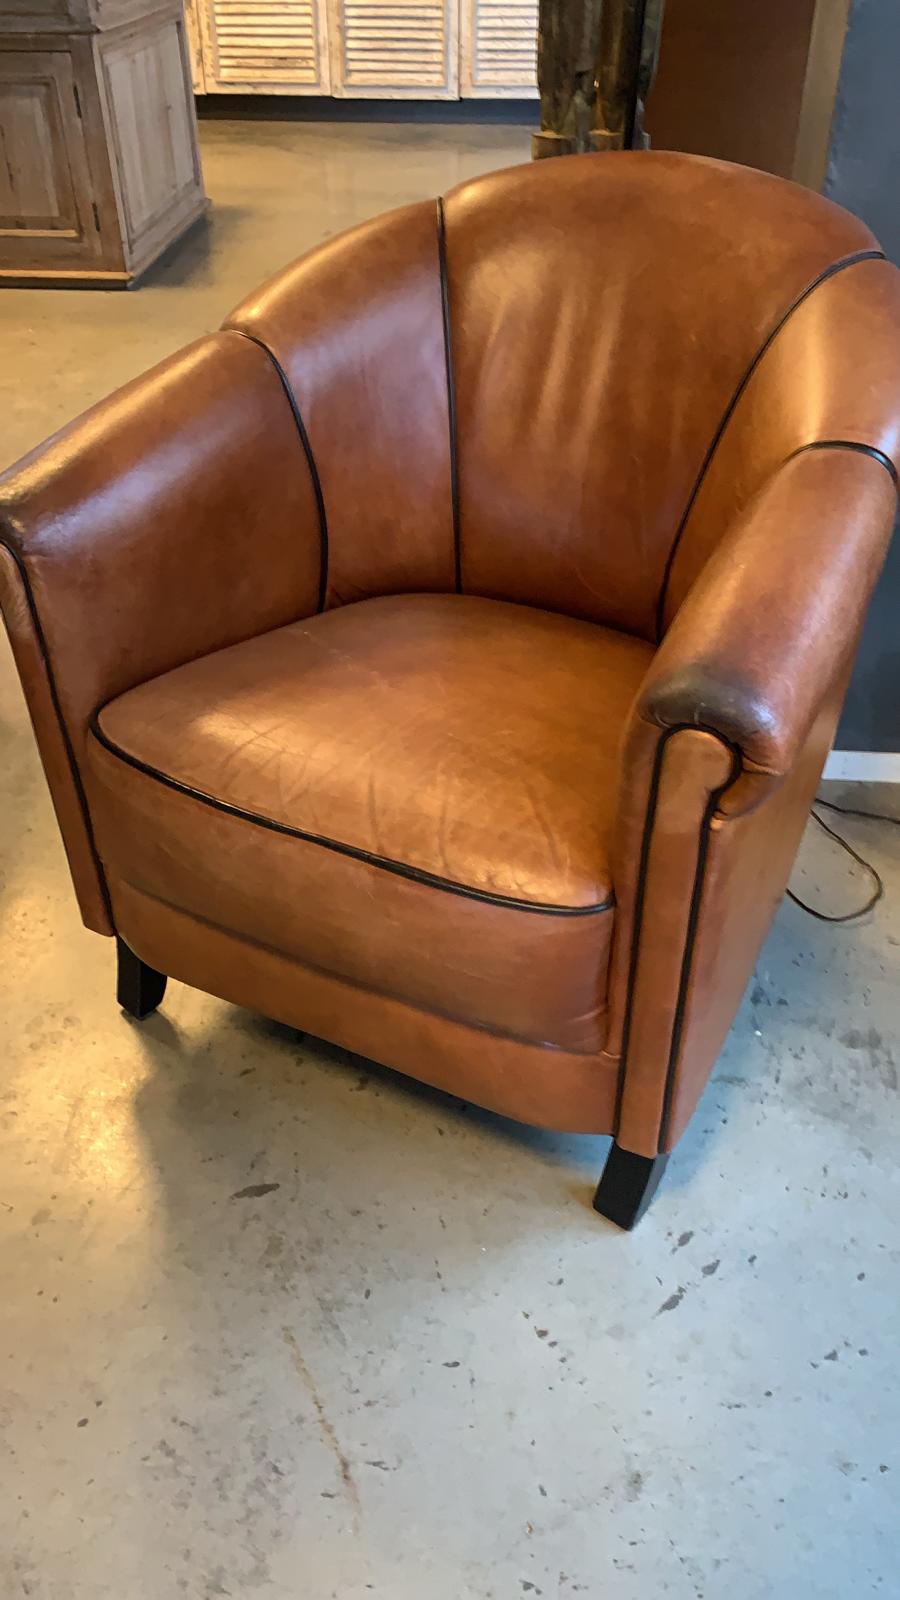 Vintage French 1940s leather club chair VLS #3191